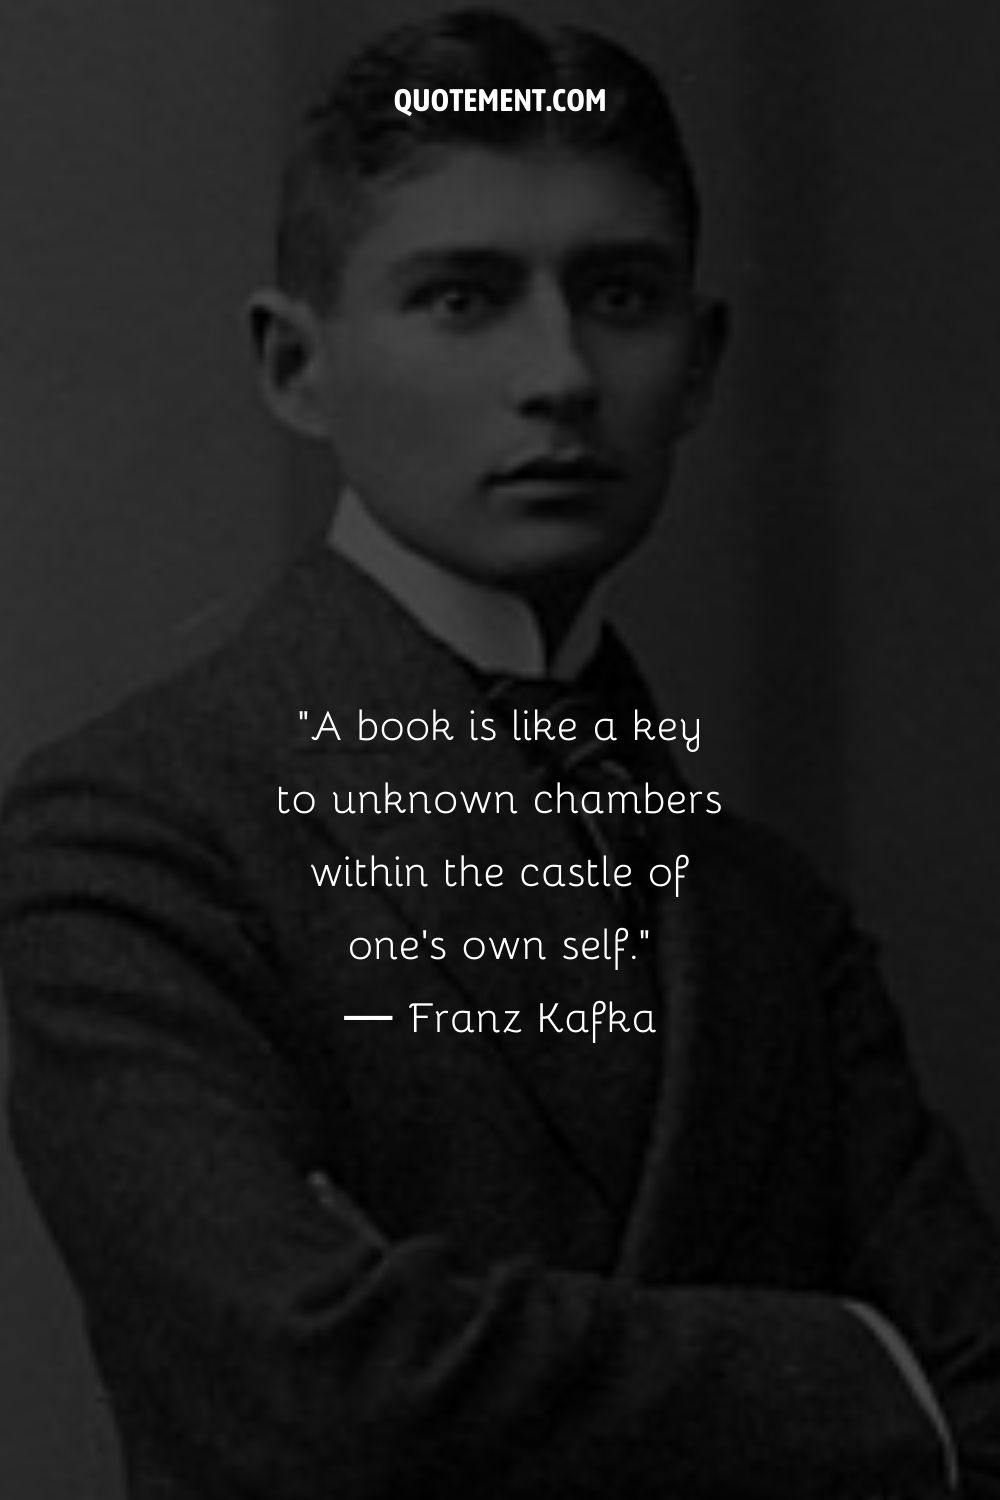 A book is like a key to unknown chambers within the castle of one’s own self.